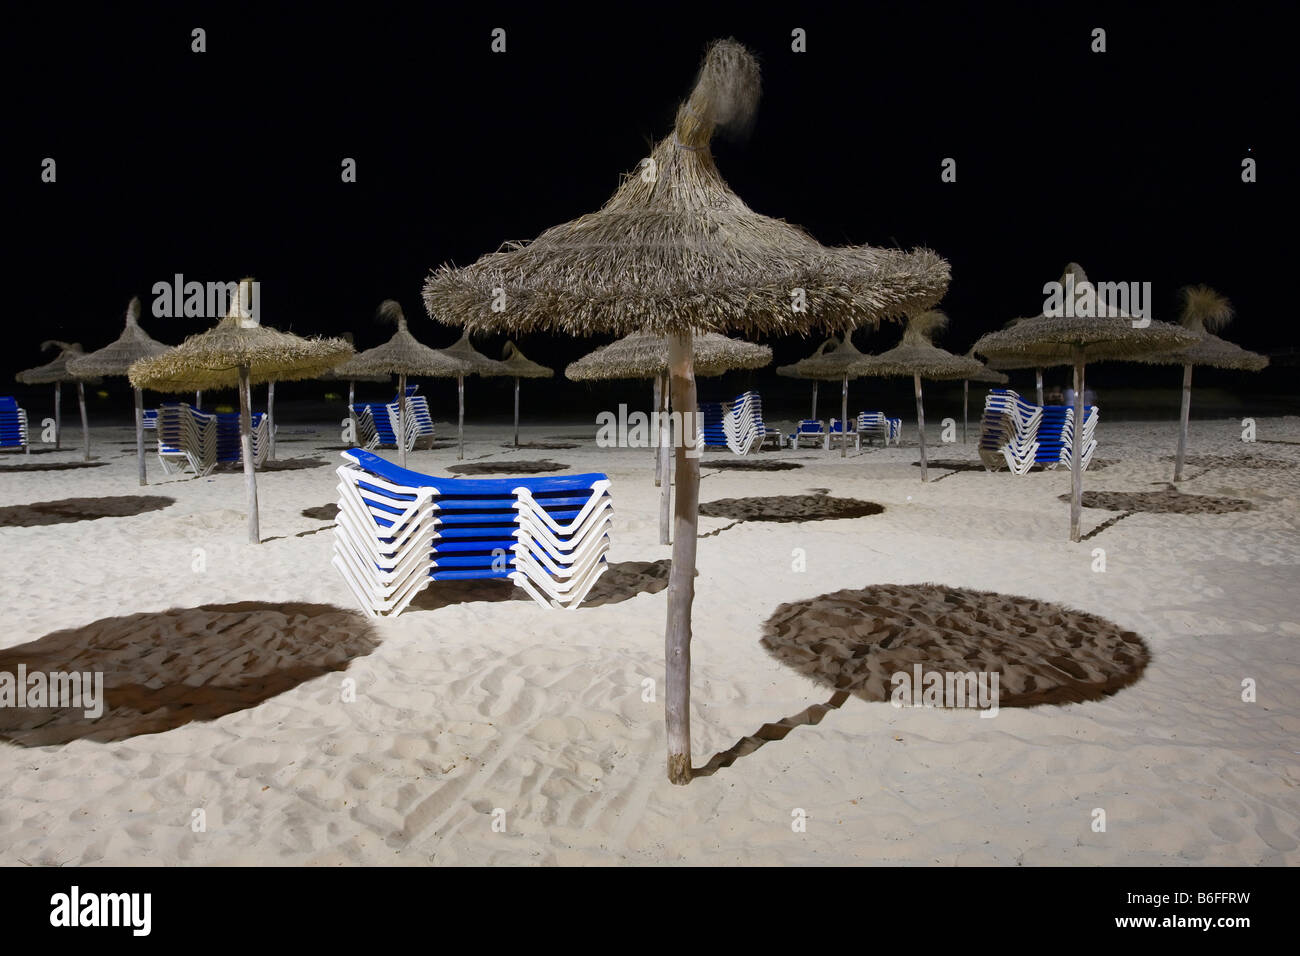 Sunshades and stacked deckchairs on the beach of Sa Coma at night, Majorca, Balearic Islands, Spain, Europe Stock Photo